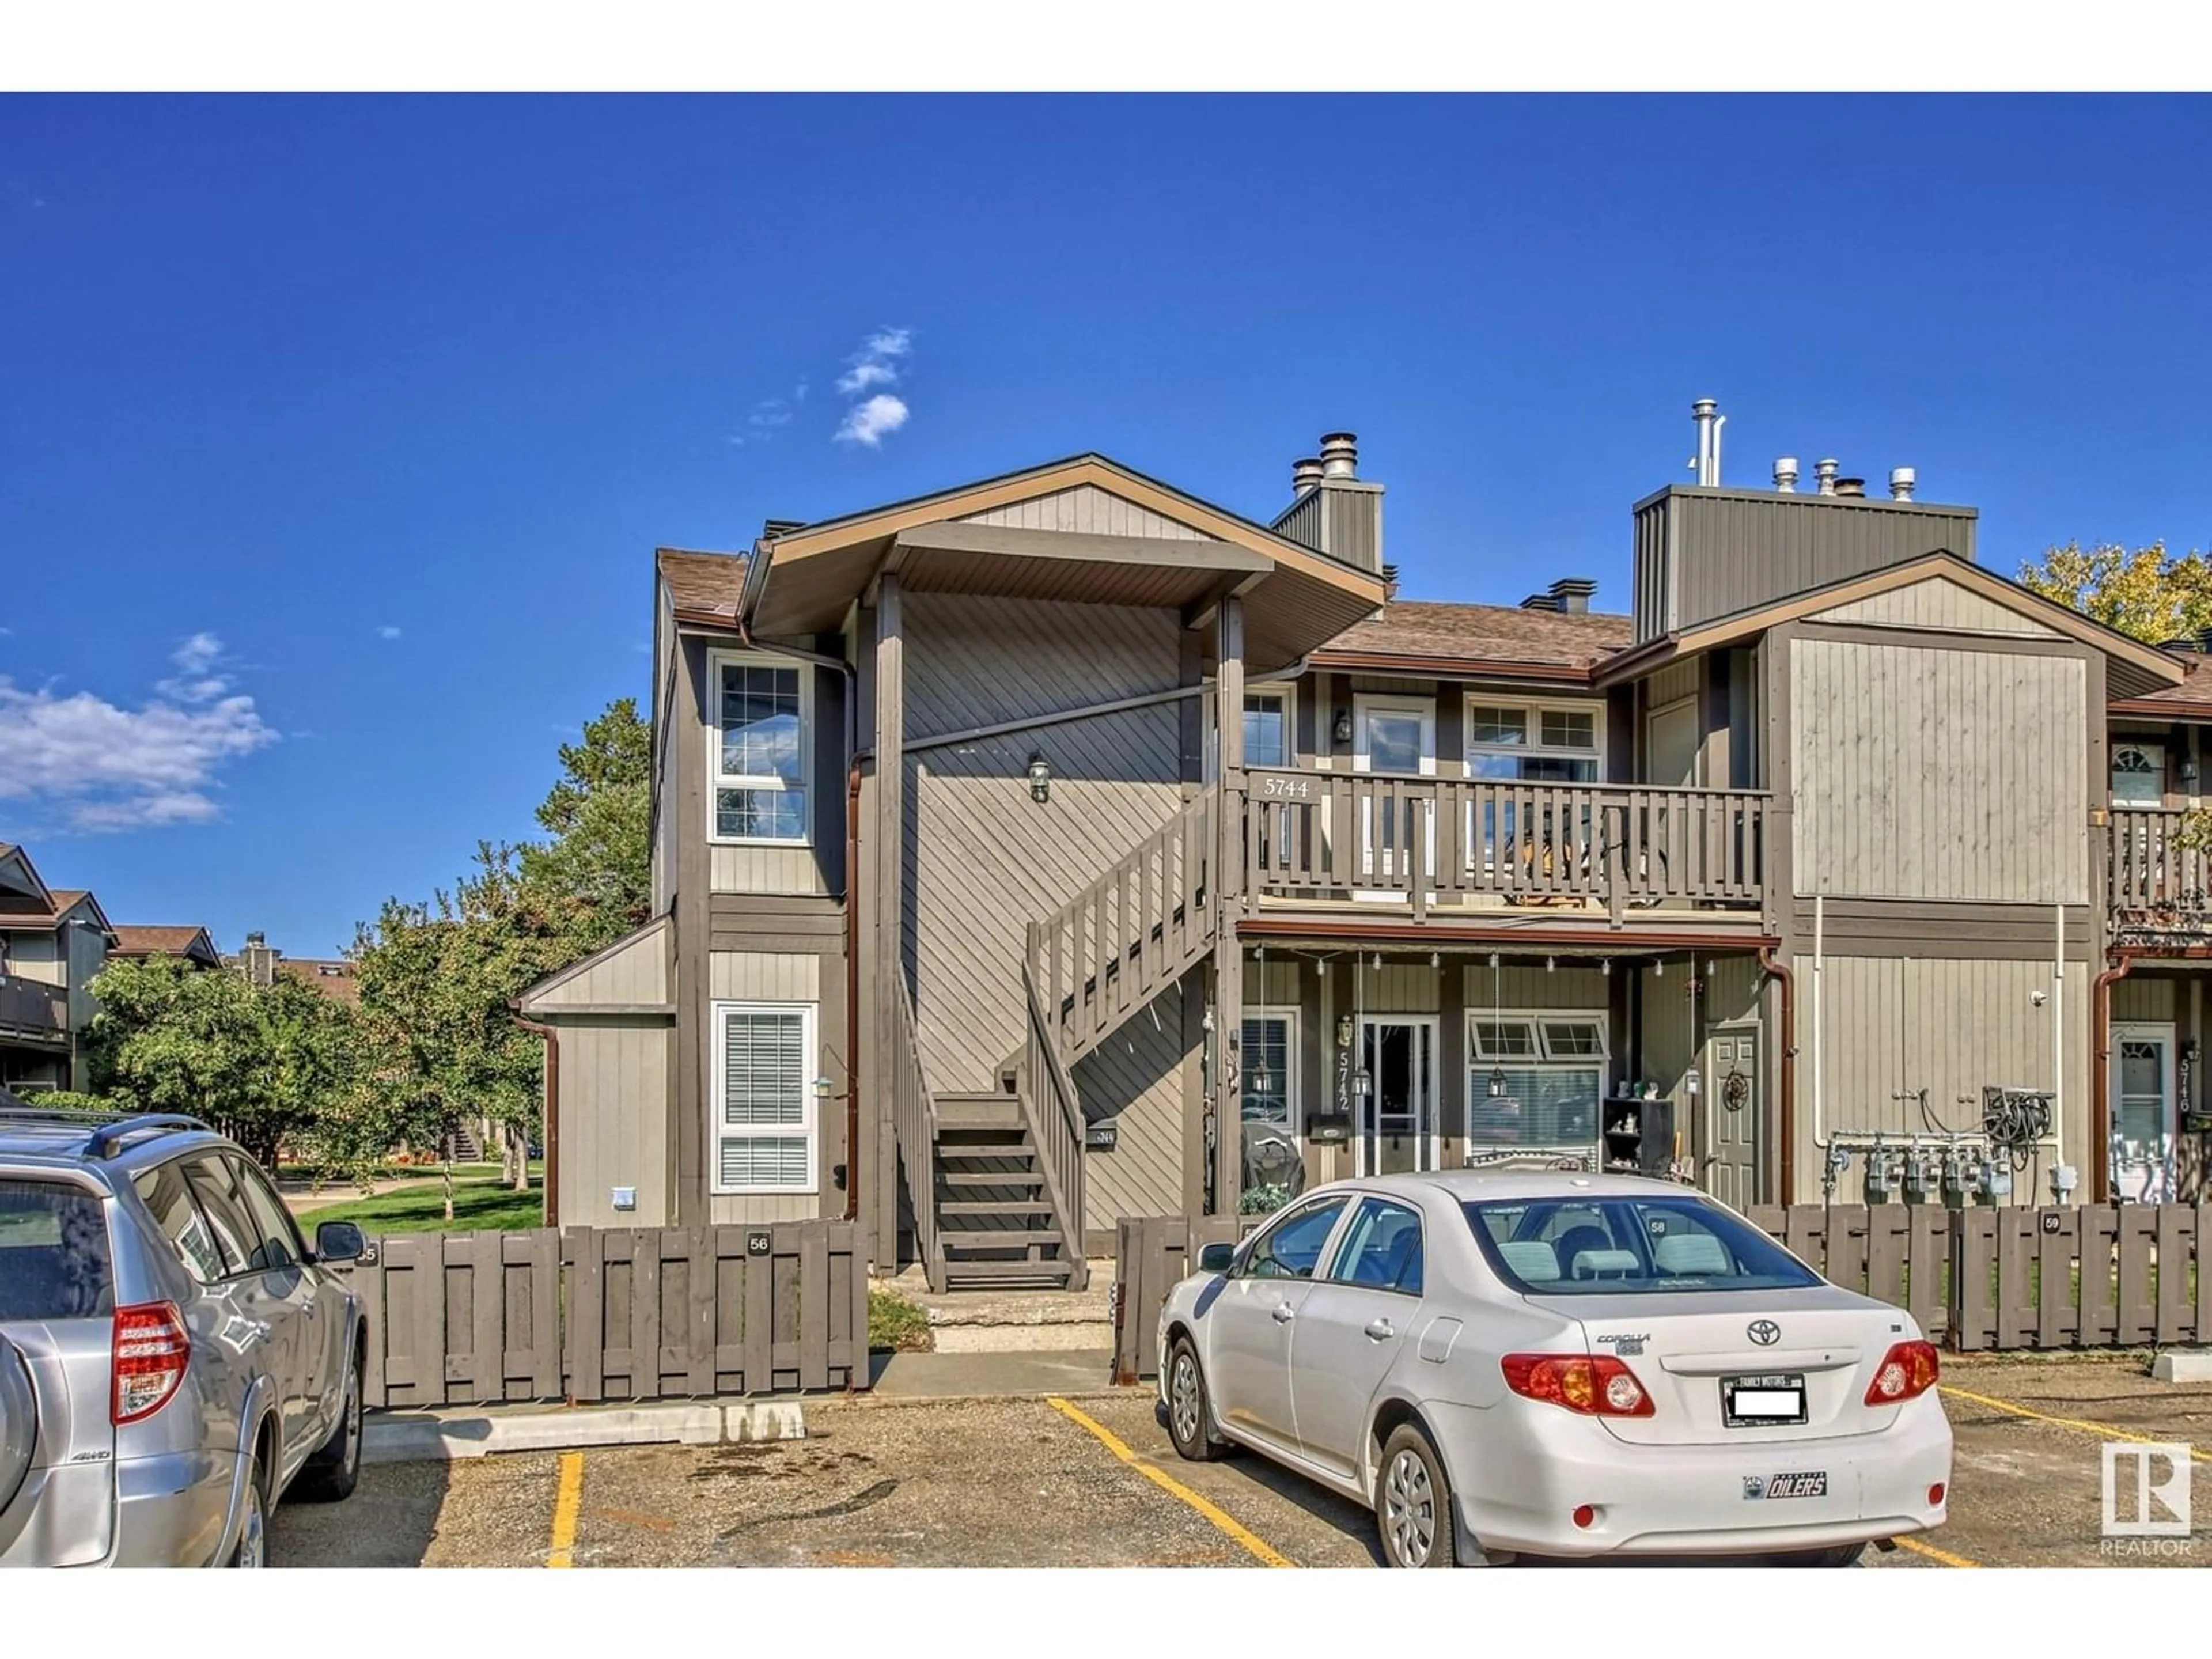 A pic from exterior of the house or condo for 5744 172 ST NW, Edmonton Alberta T6M1B4